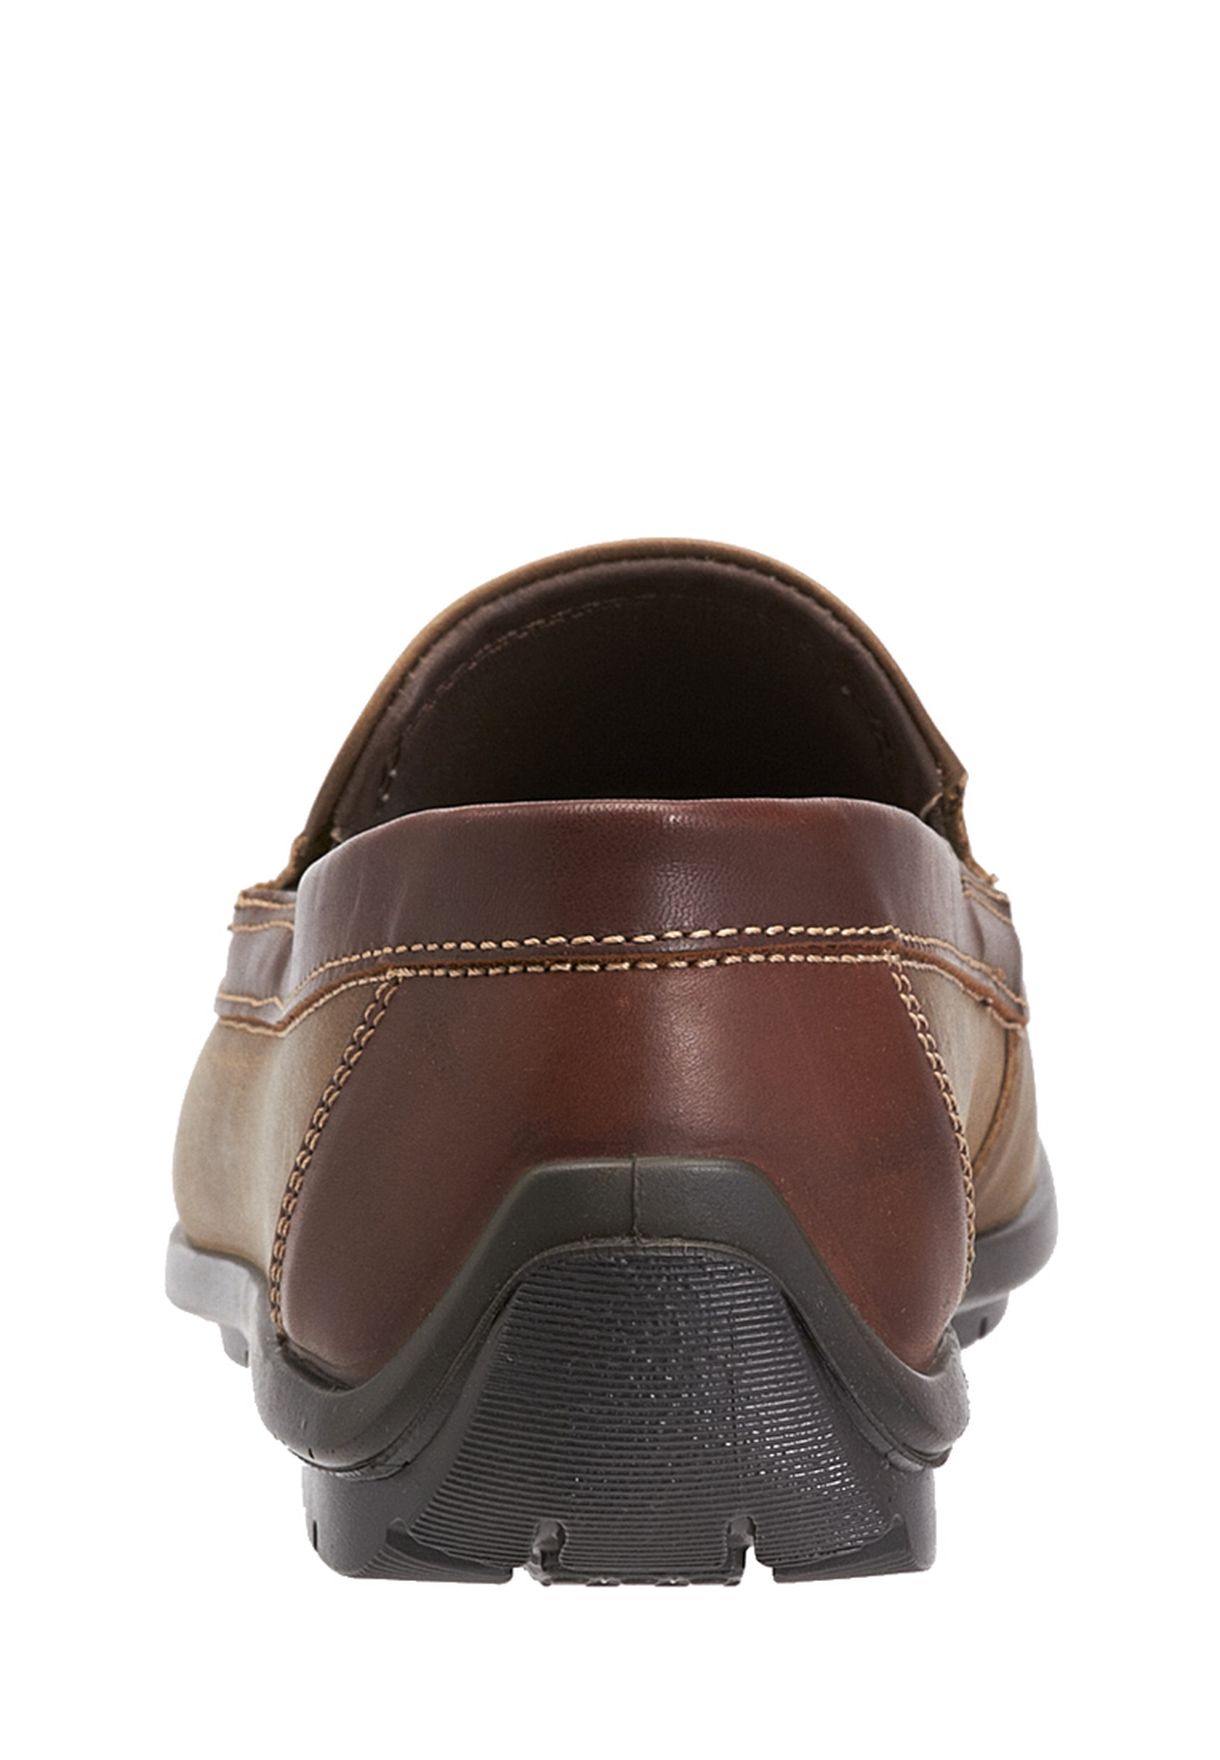 clarks shoes to buy online